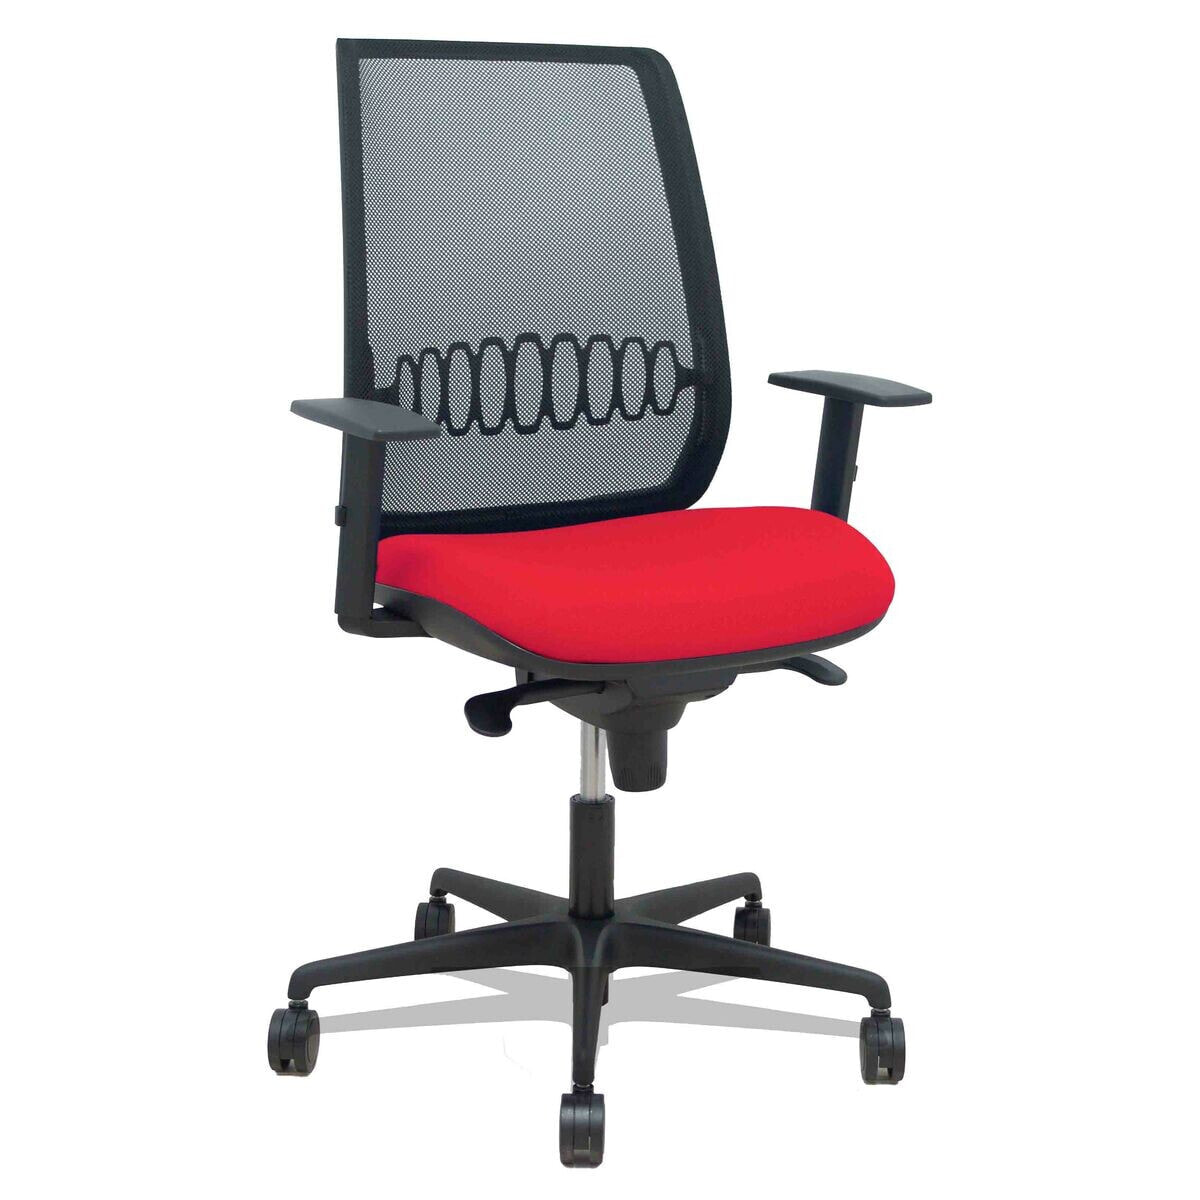 Office Chair Alares P&C 0B68R65 Red